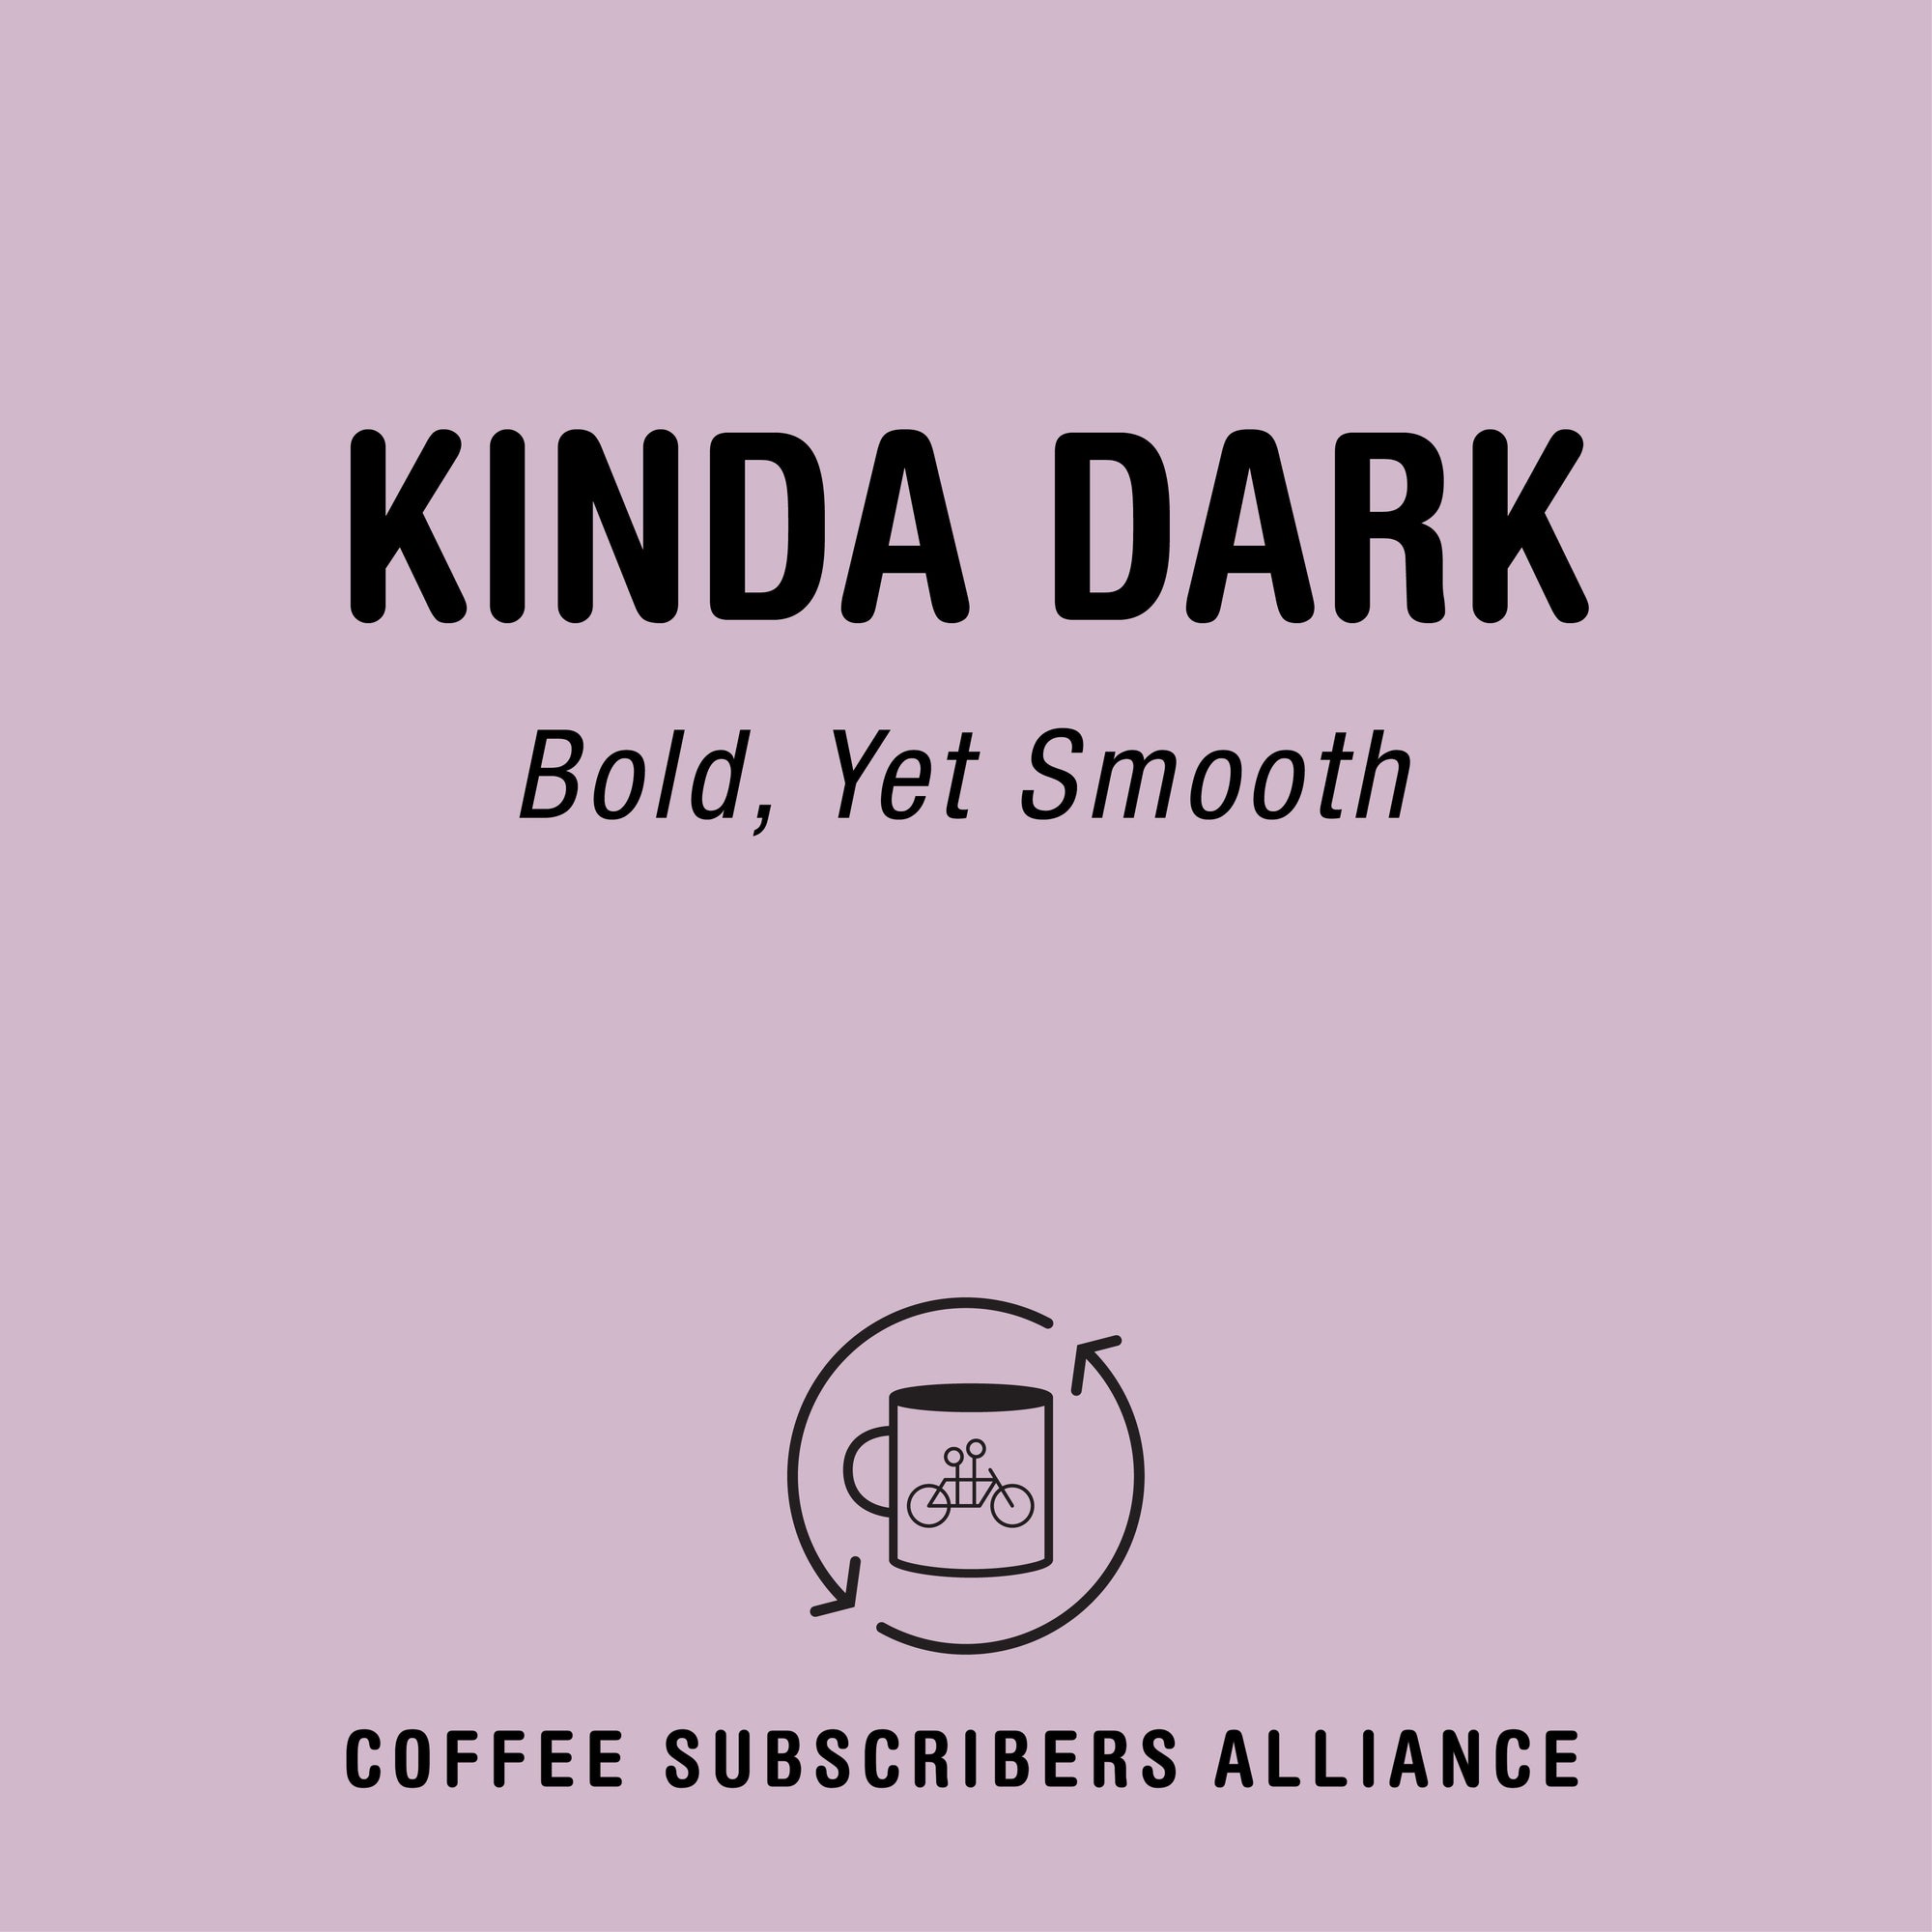 A graphic design featuring the text "Kinda Dark Subscription Gift - 1 Week x 3" in black on a light purple background. Below is a logo of a cup with steam and text "Tandem Coffee Subscription Alliance.